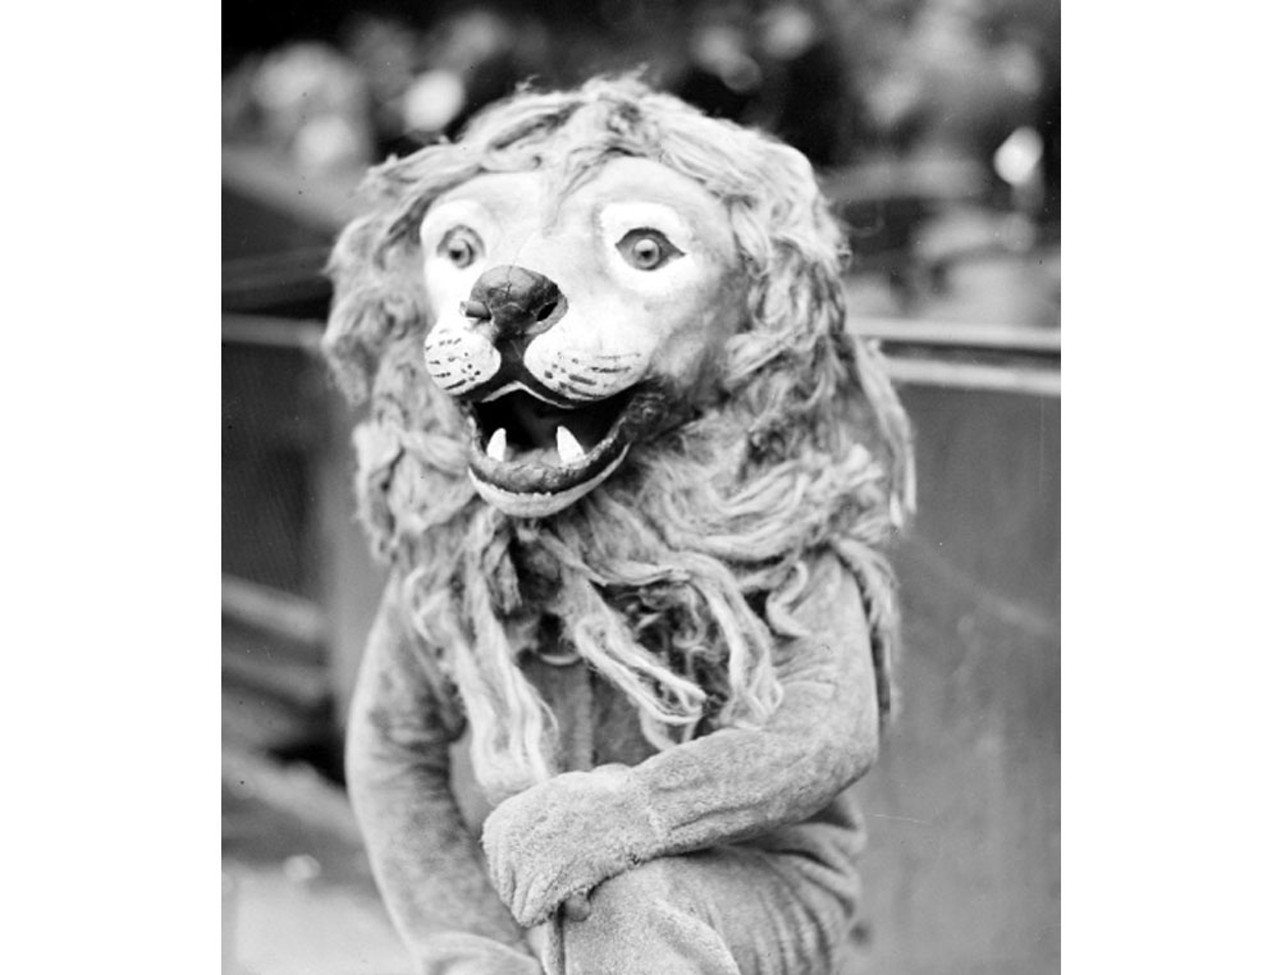 Thank goodness those mascot costumes have changed. This was in 1942.